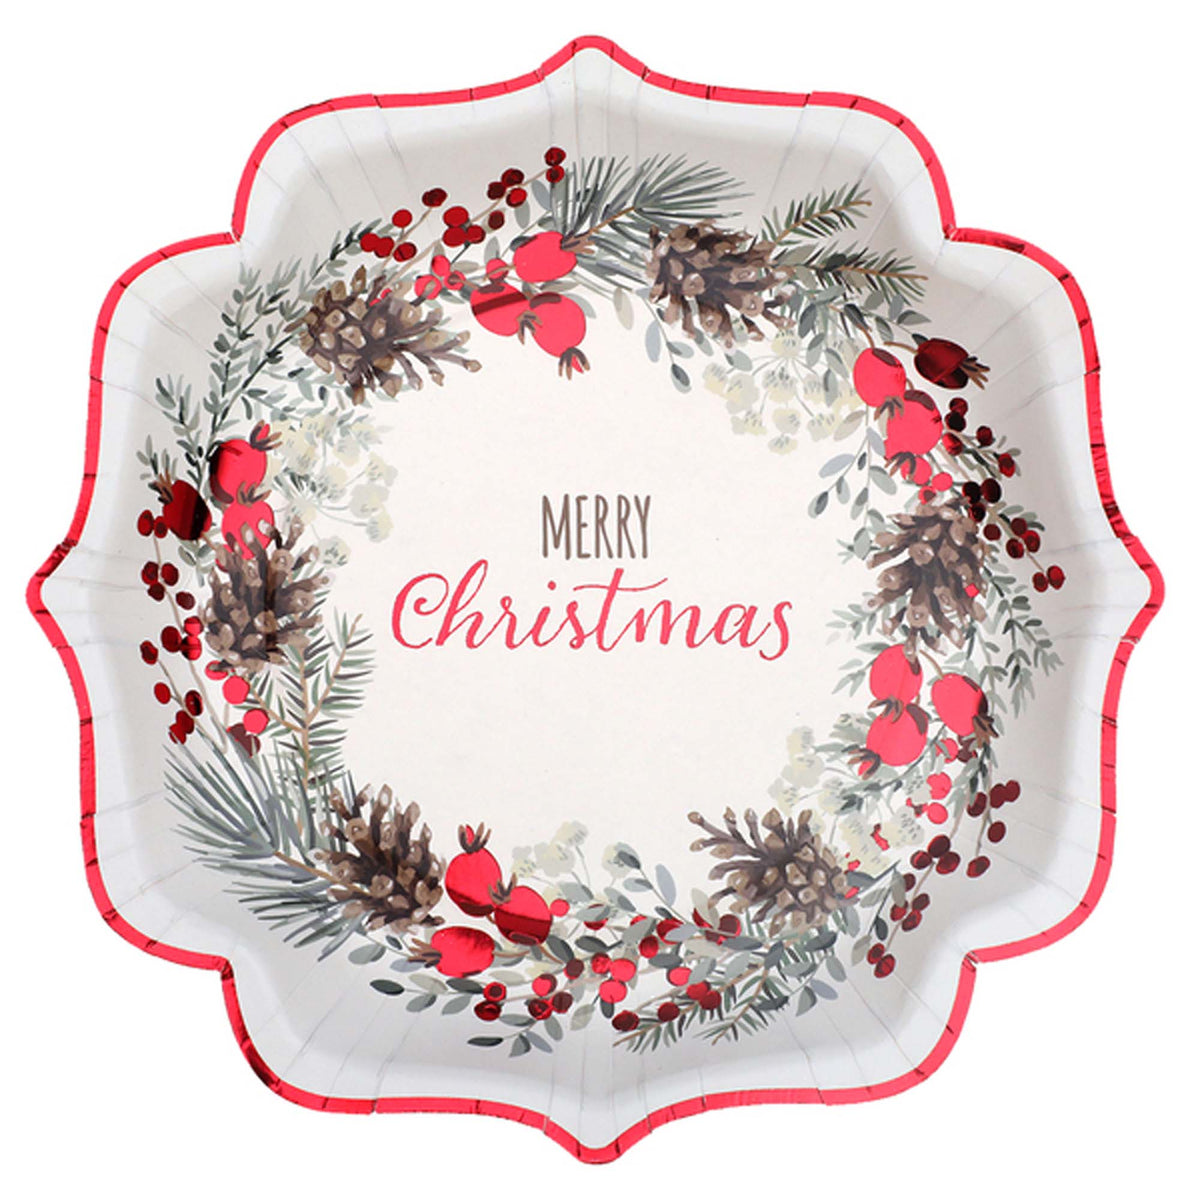 SANTEX Christmas Merry Christmas Red Large Paper Plates, 8 Inches, 10 Count 3660380080343